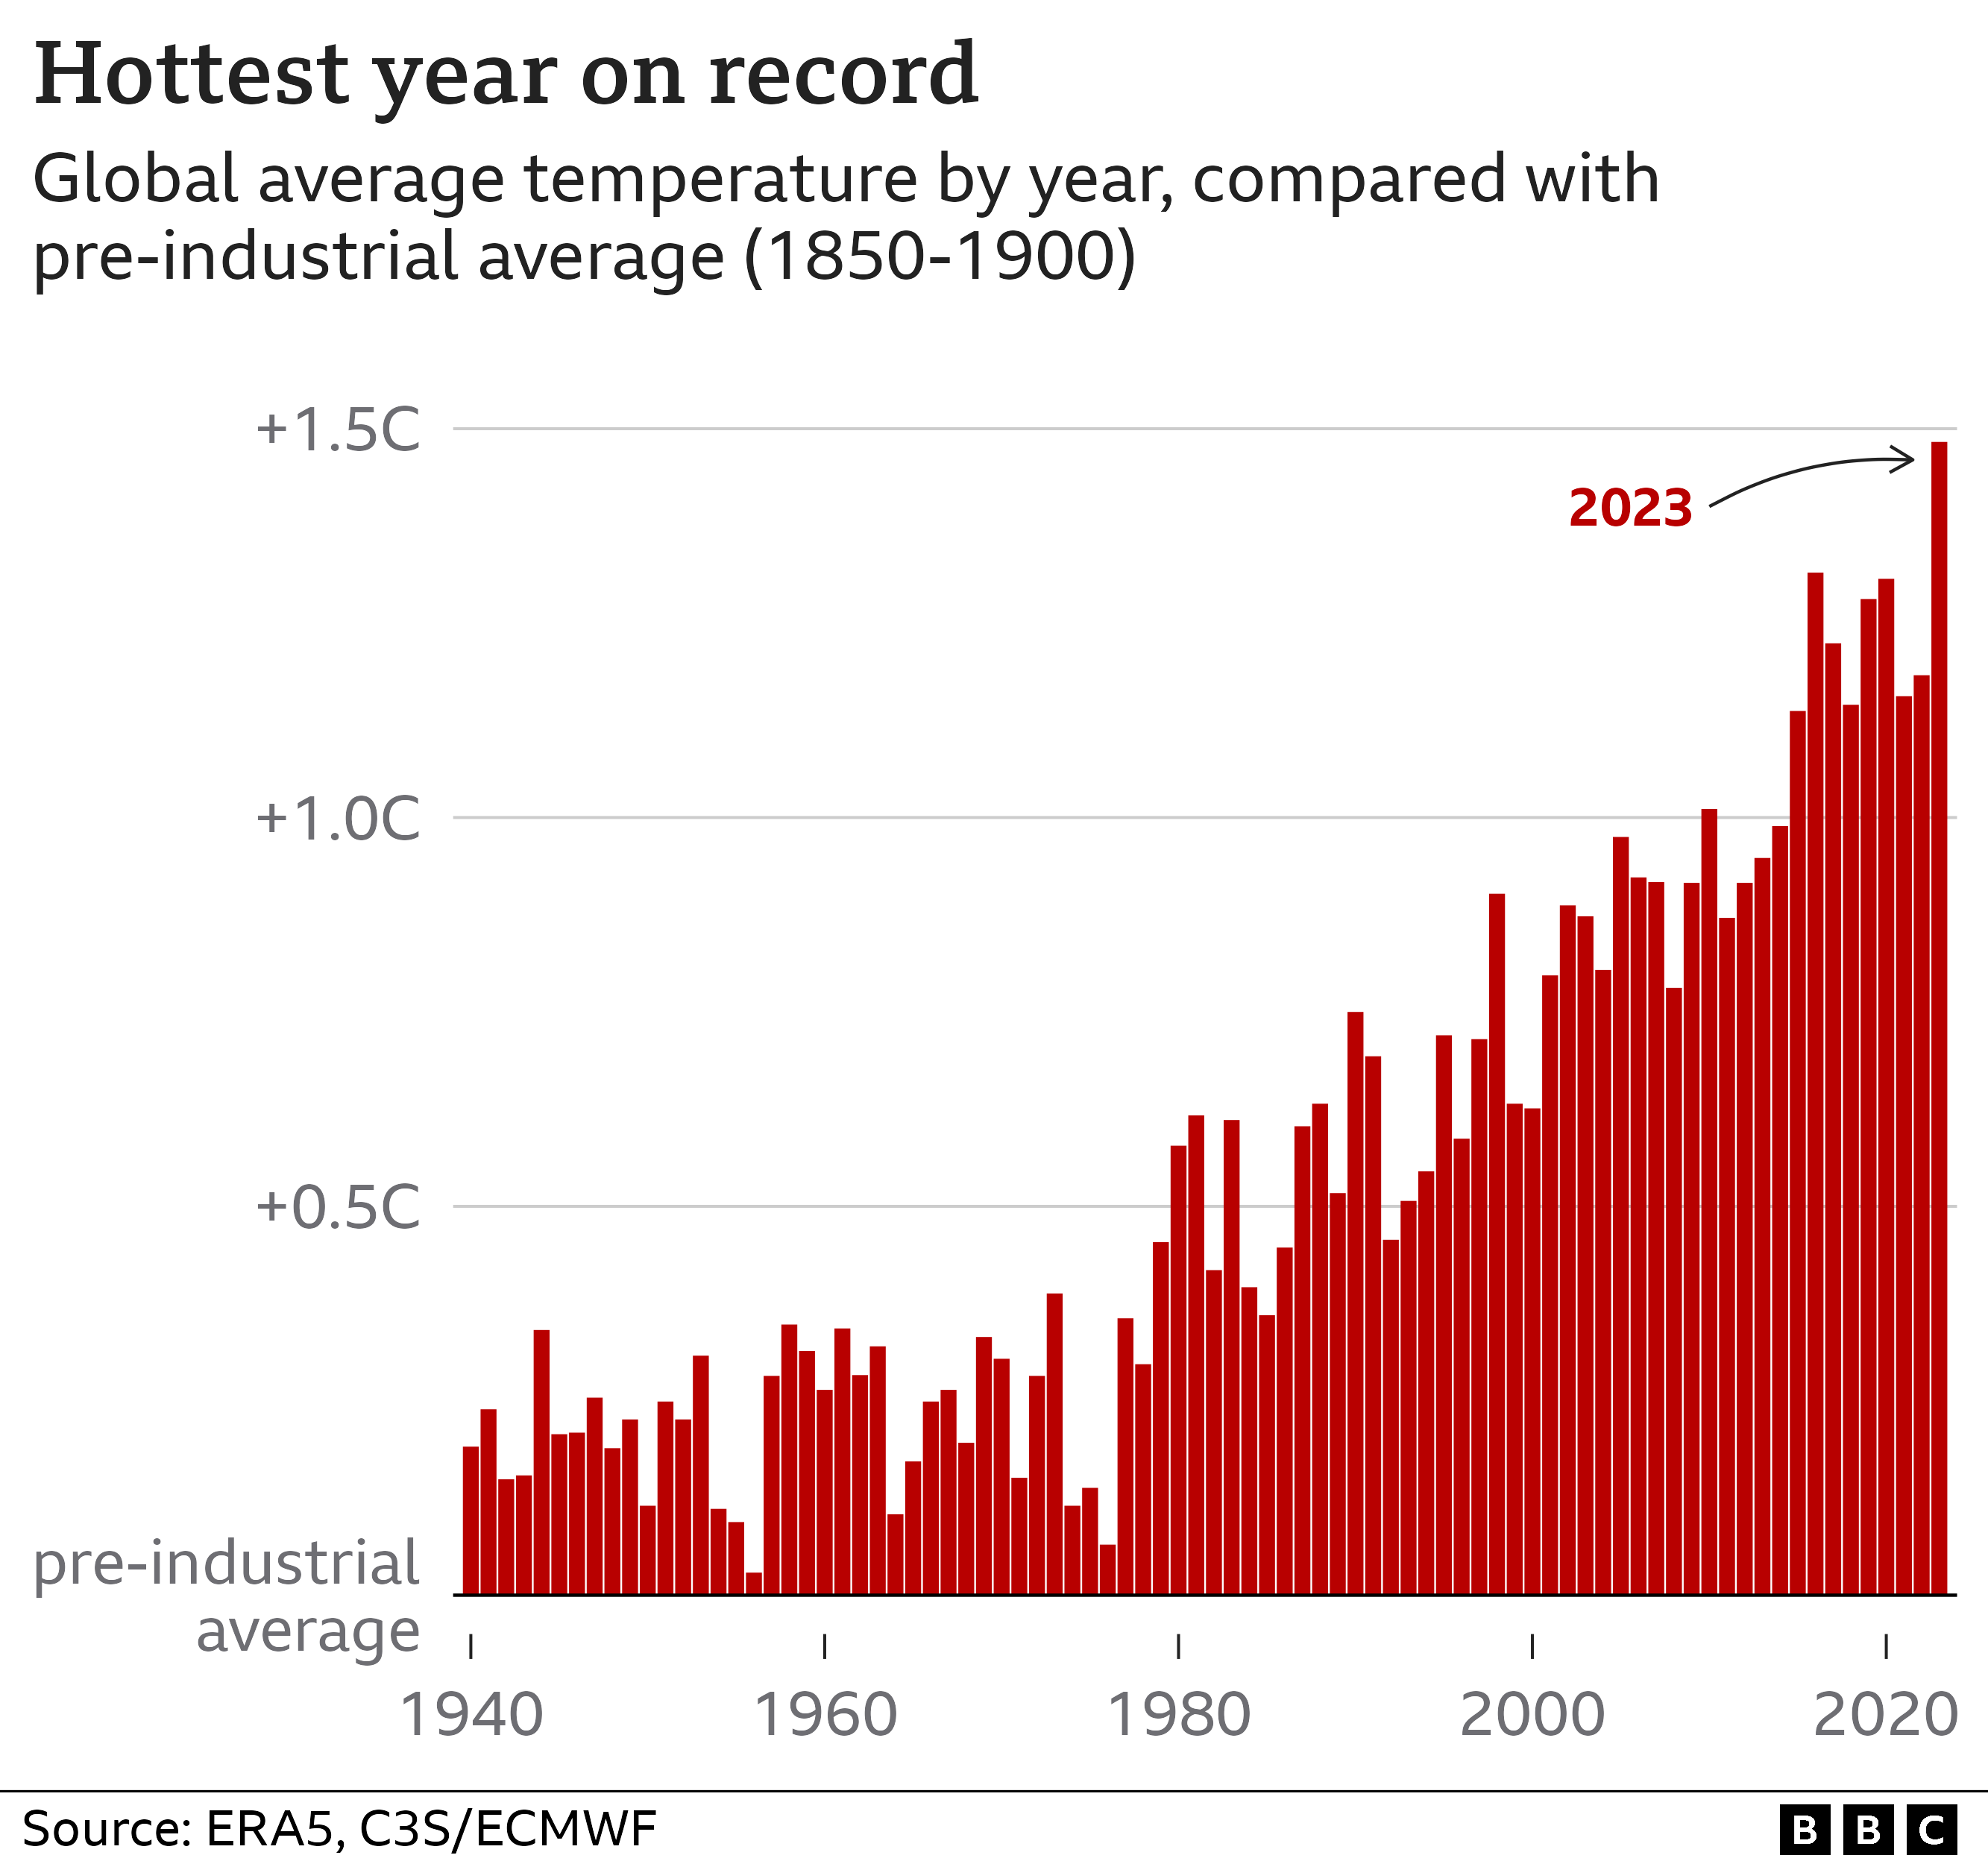 Chart showing change in global temperature compared to the pre-industrial average since 1940. Temperatures have been rising, and 2023 was the warmest year on record at nearly 1.5C above pre-industrial levels.